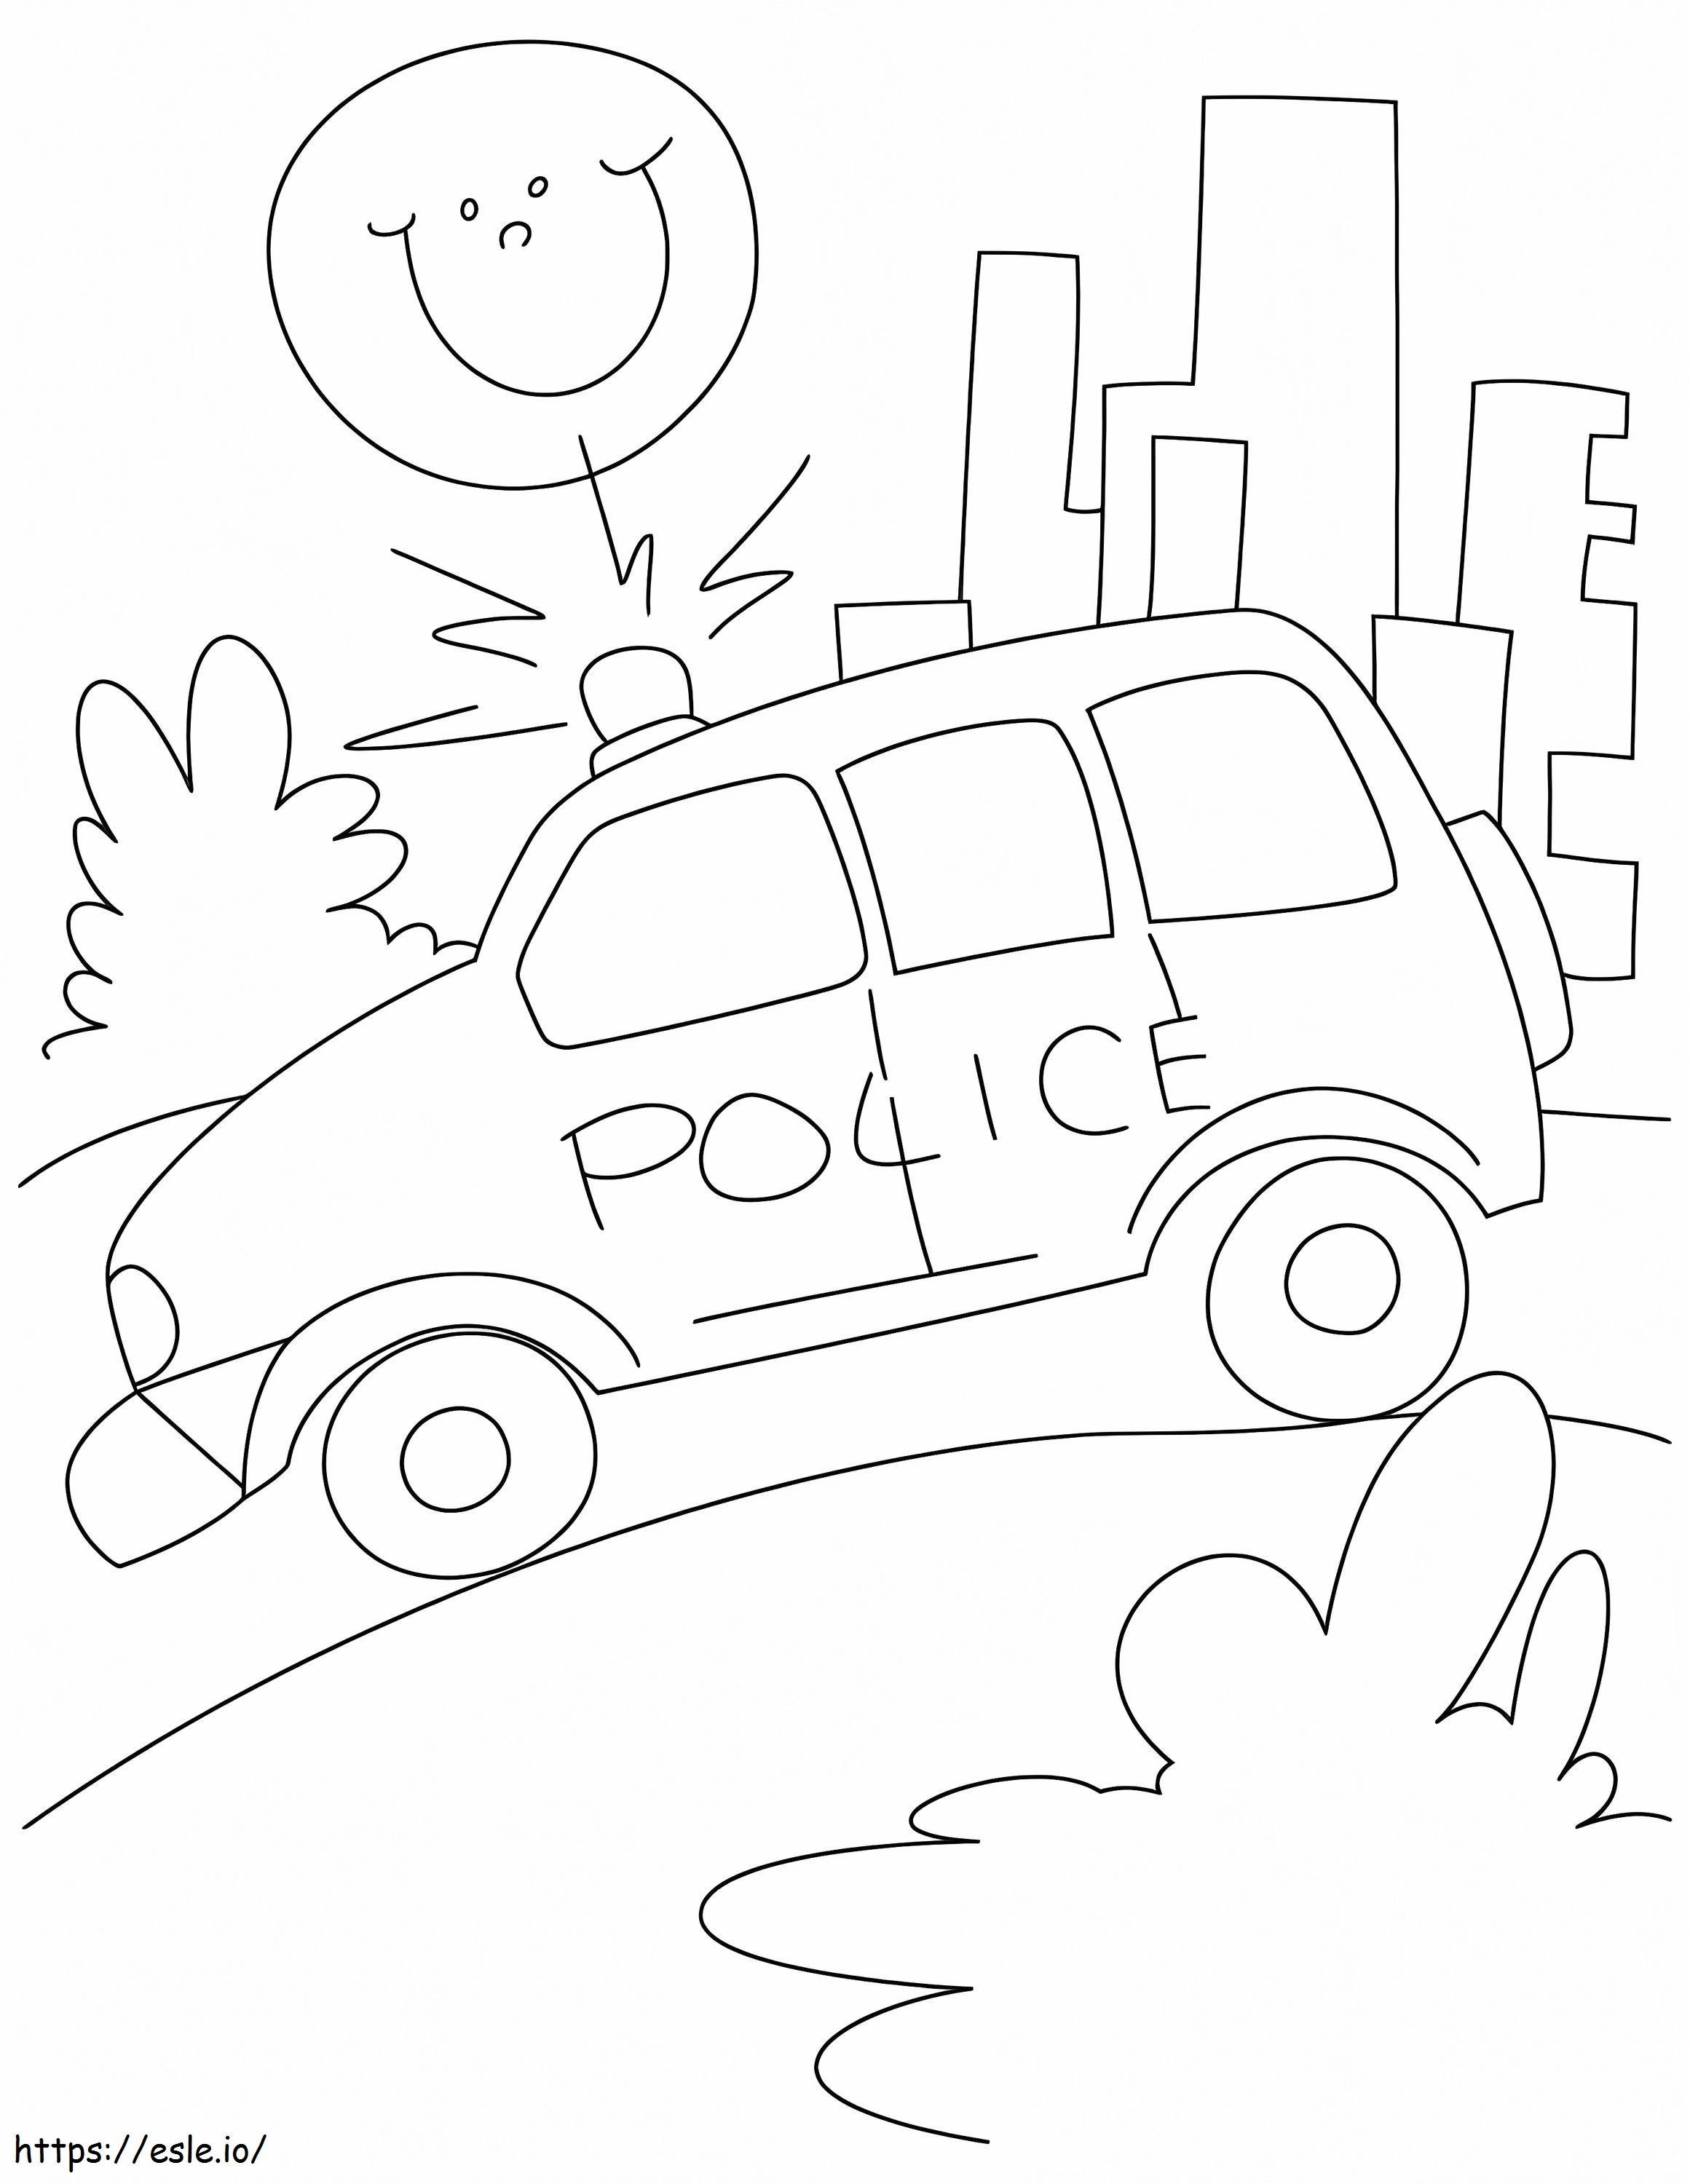 Police Gasoline Car On The Highway coloring page